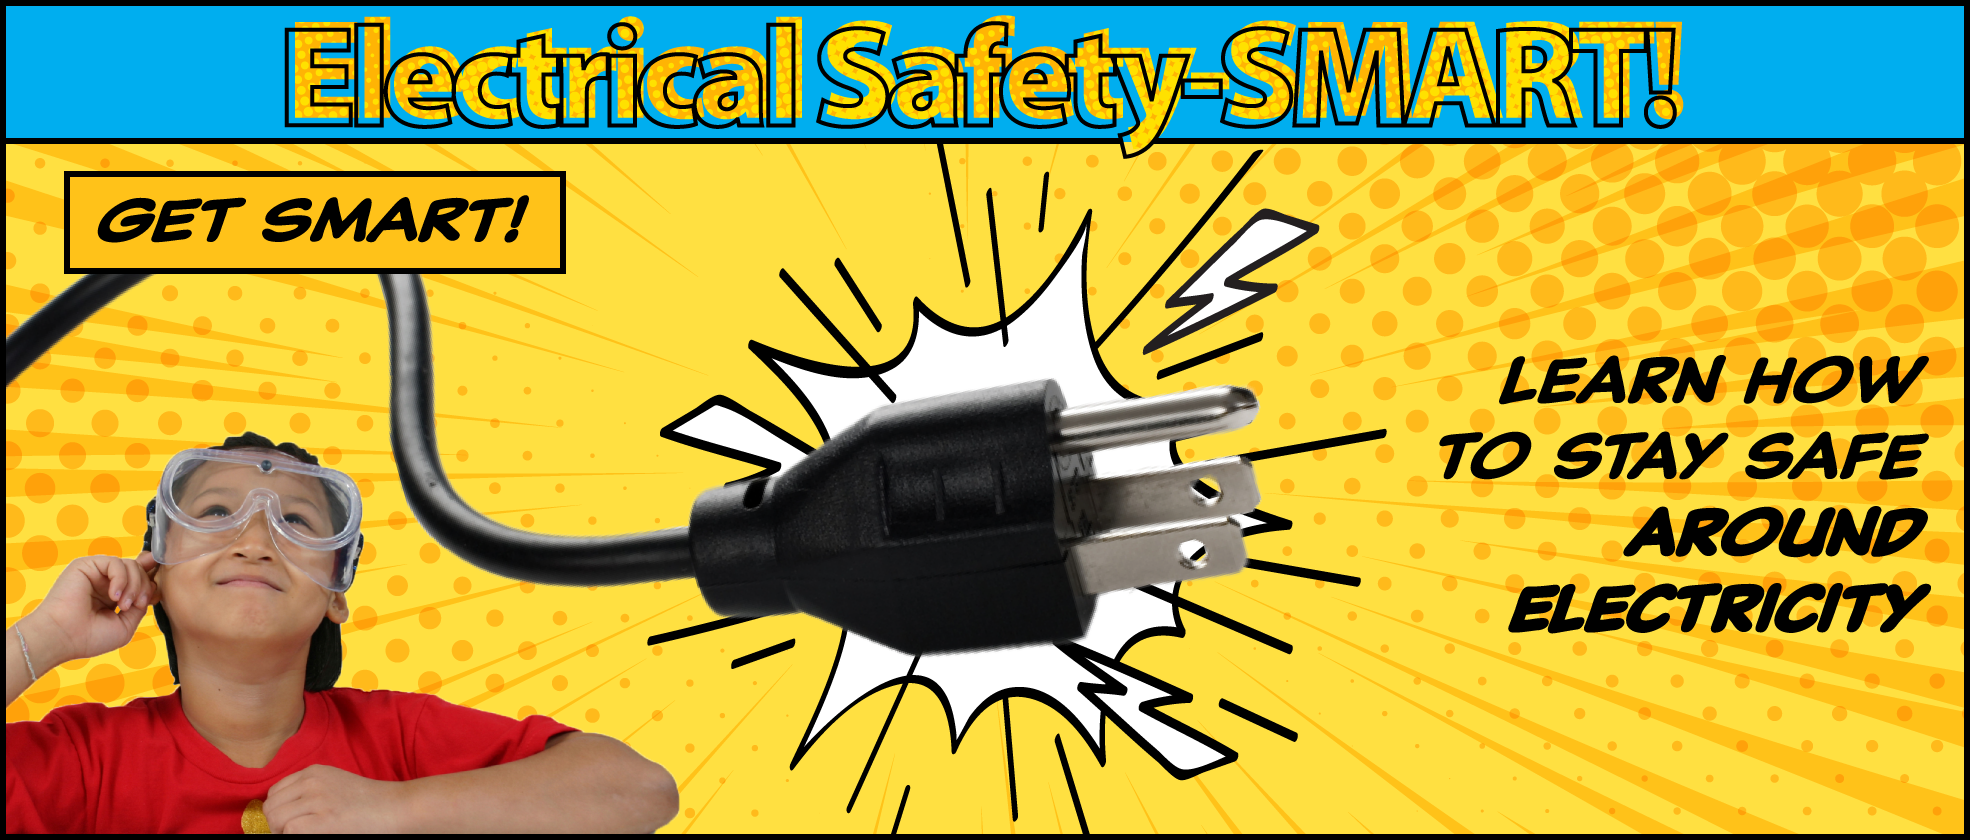 Electrical Safety-SMART: Get SMART! Learn how to stay safe around electricity